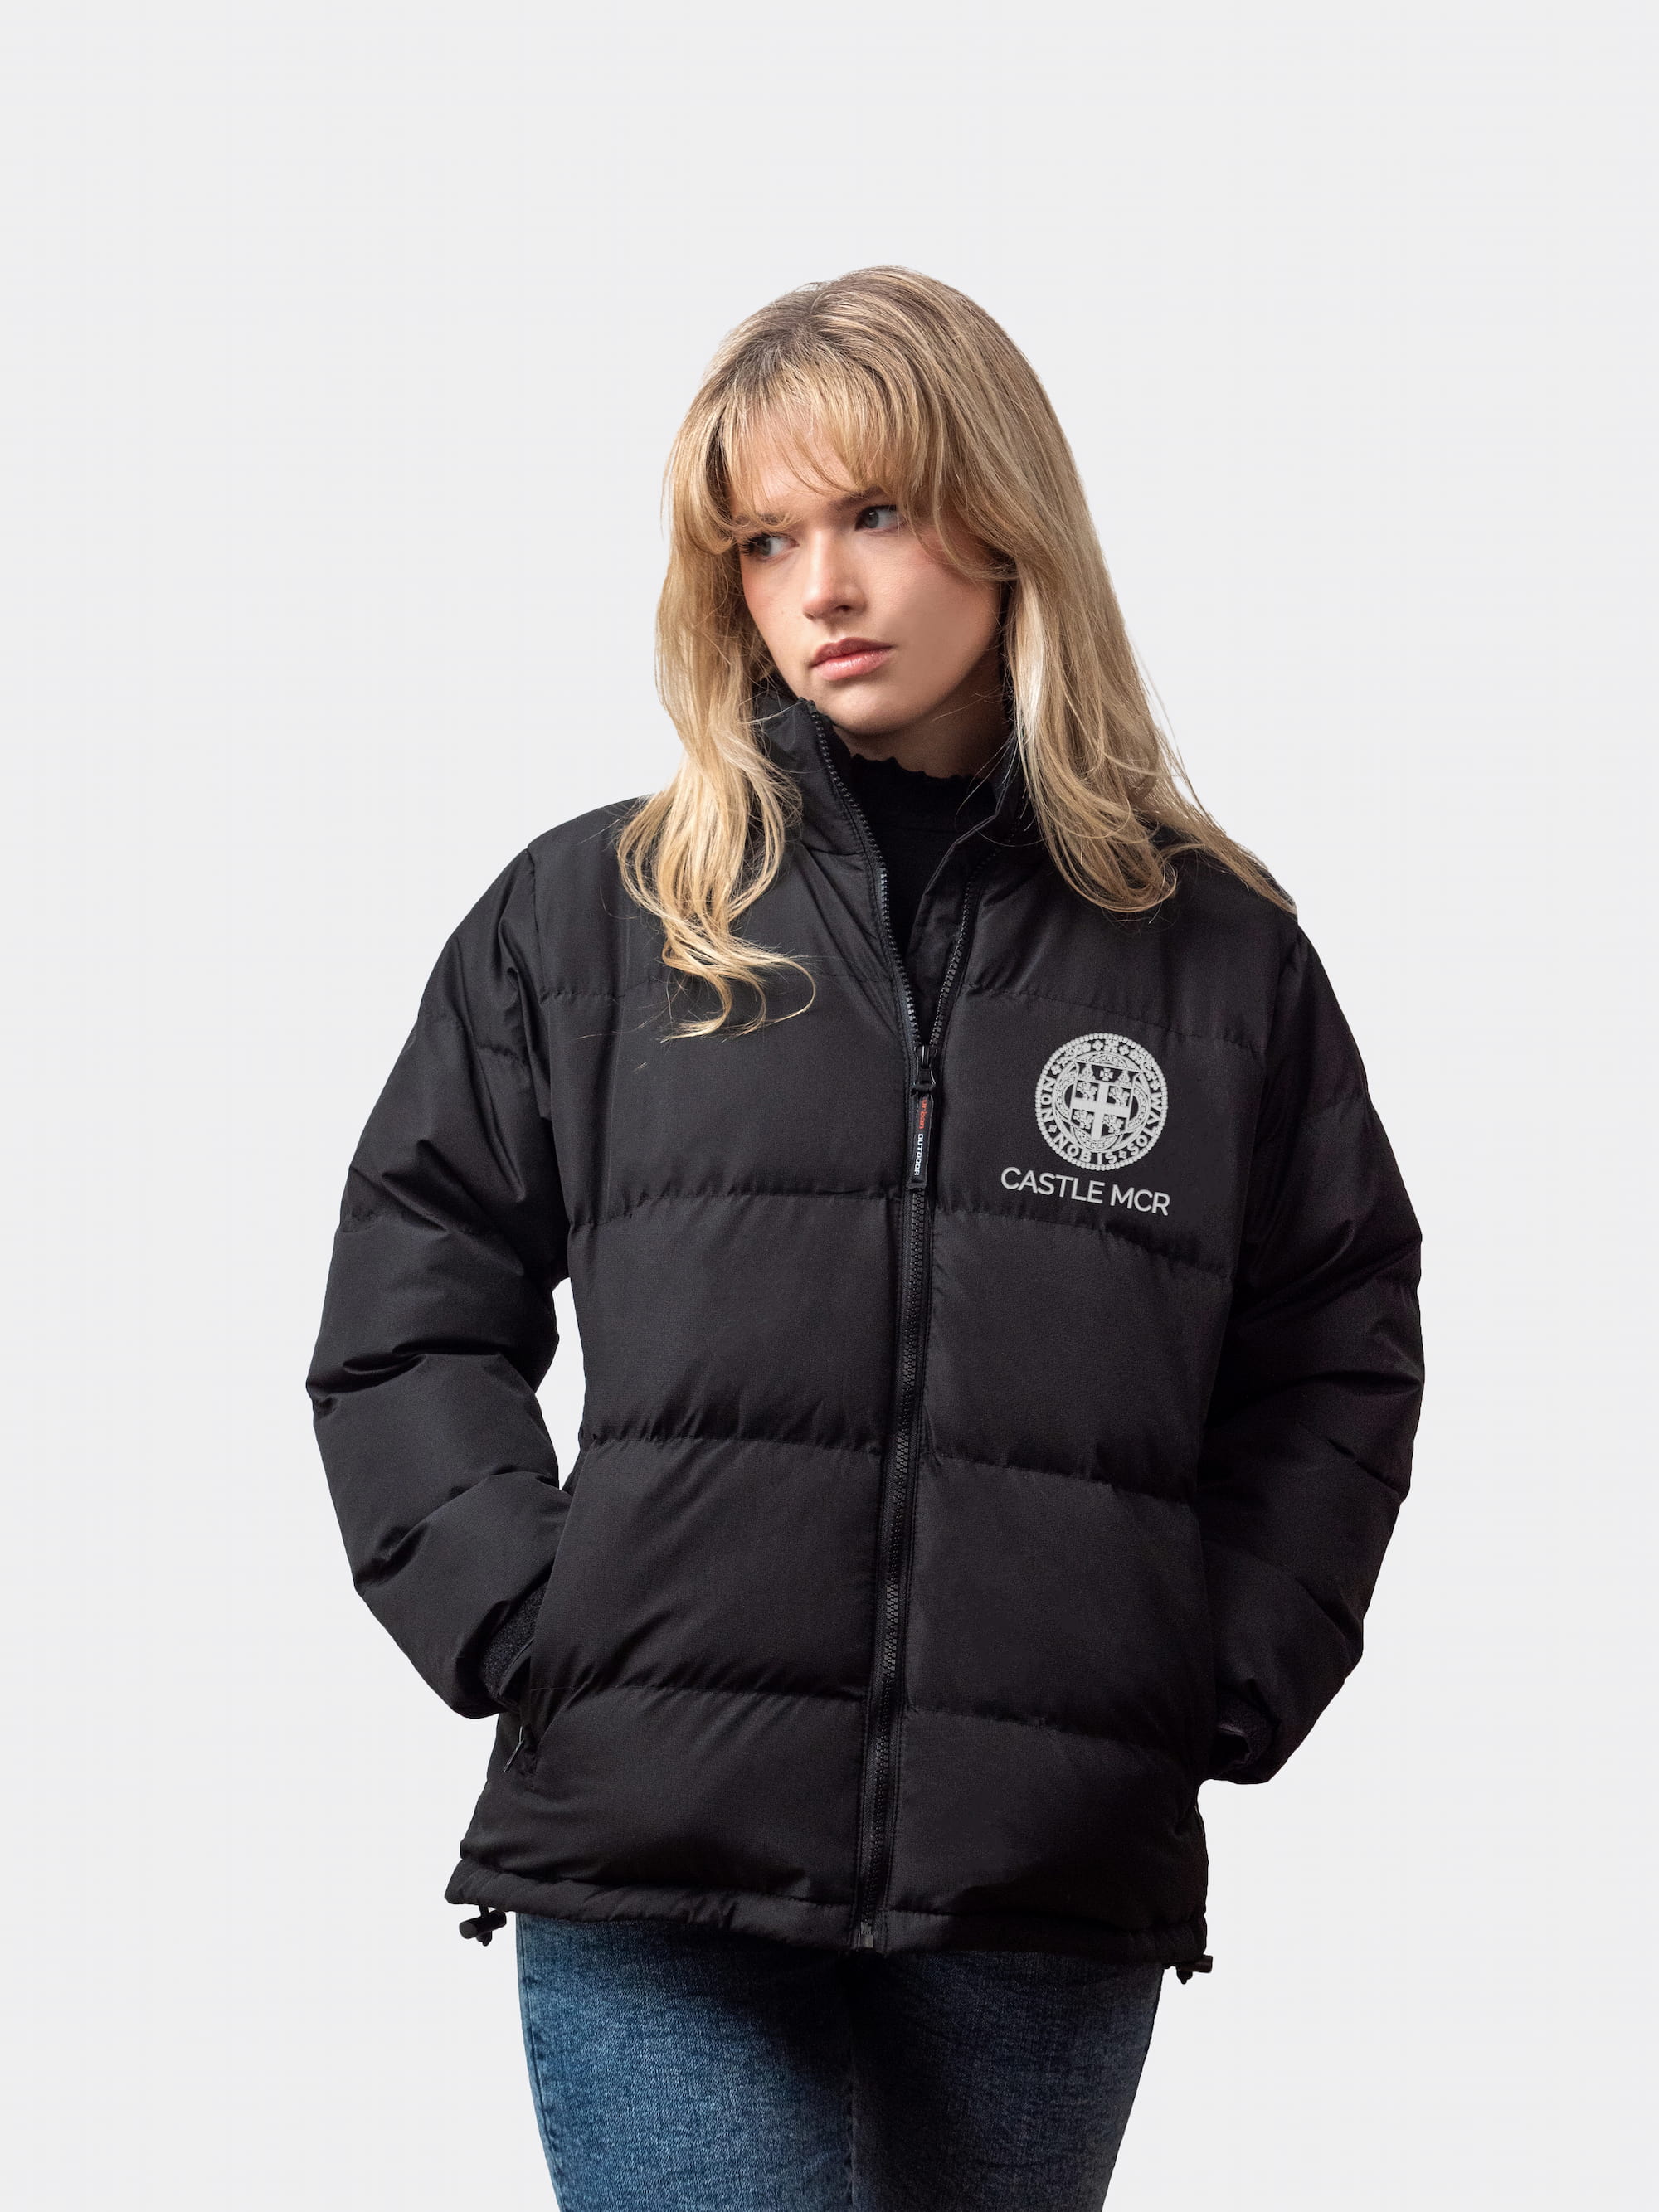 A personalised women’s Puffer Jacket, with Durham University crest, from Redbird  Apparel